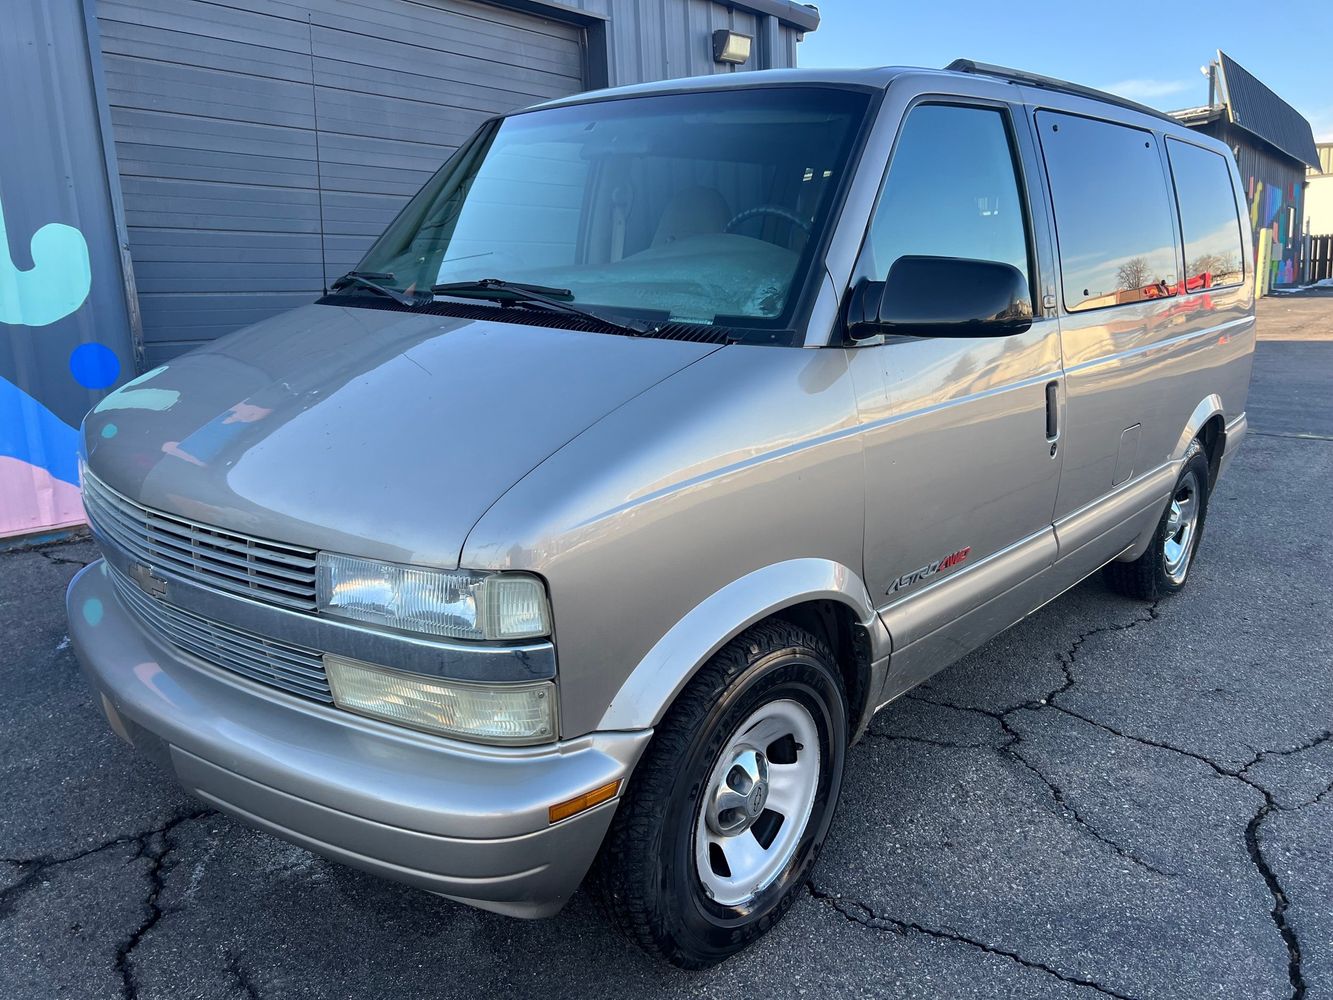 Used Chevrolet Astro's in Fort Lupton, Colorado for sale - MotorCloud